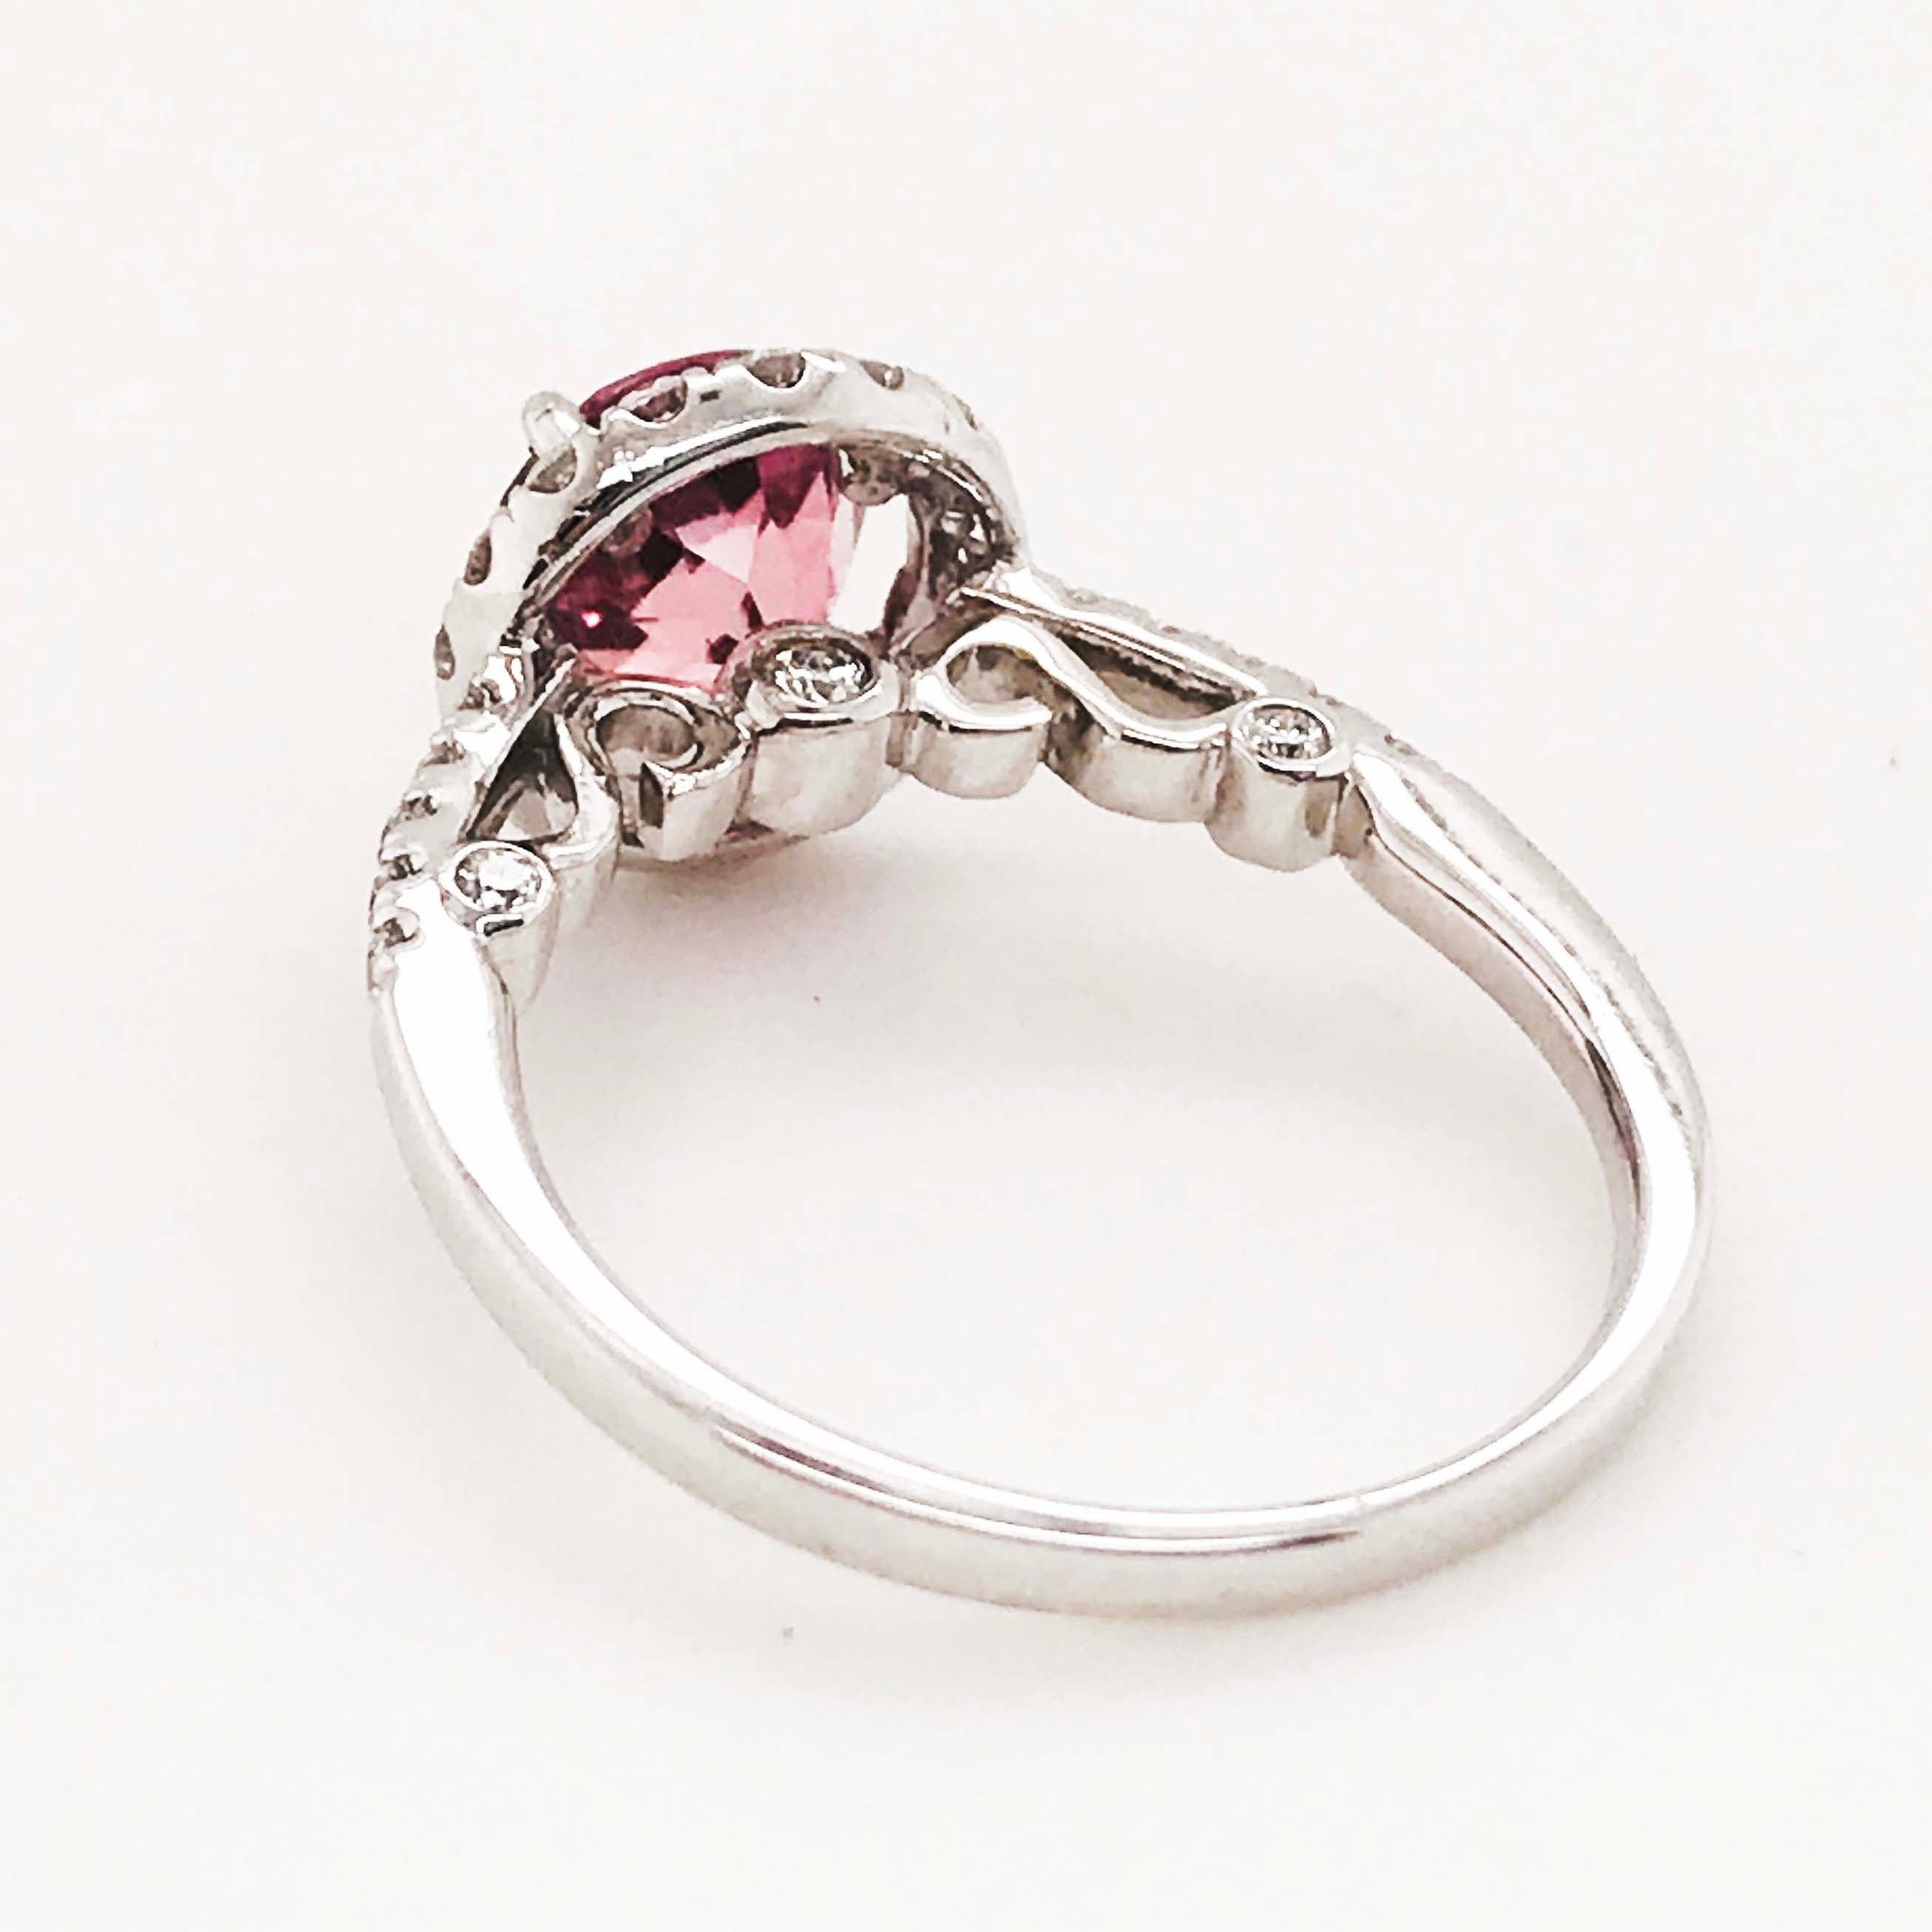 For Sale:  Pink Tourmaline and Diamond Ring, White Gold 2 Carat Diamond and Gem Engagement 5